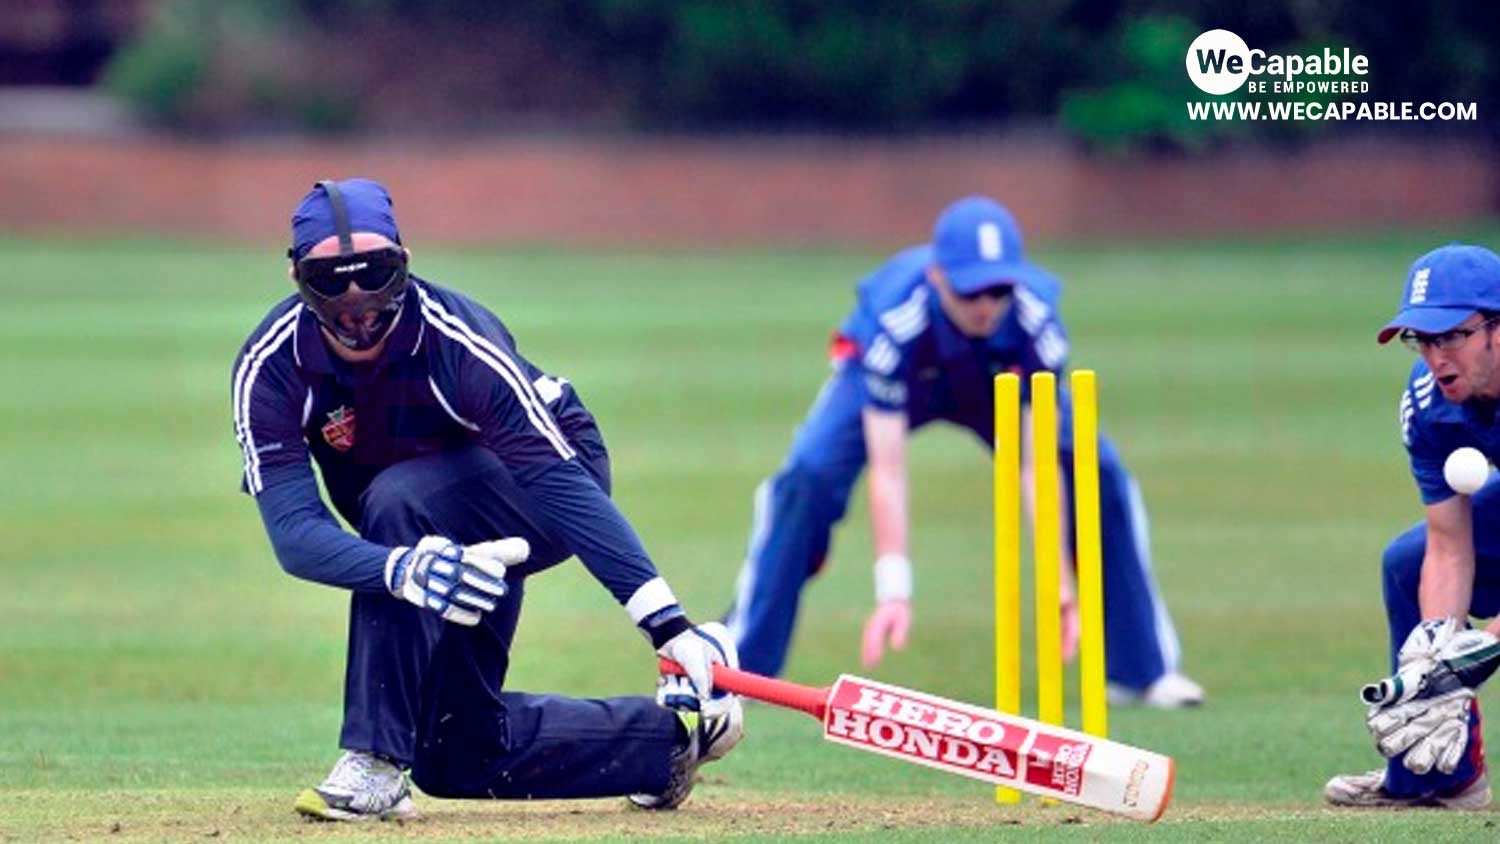 The image shows a game of blind cricket being played. There is a batsman in front of yellow stumps, a wicket-keeper and a fielder.